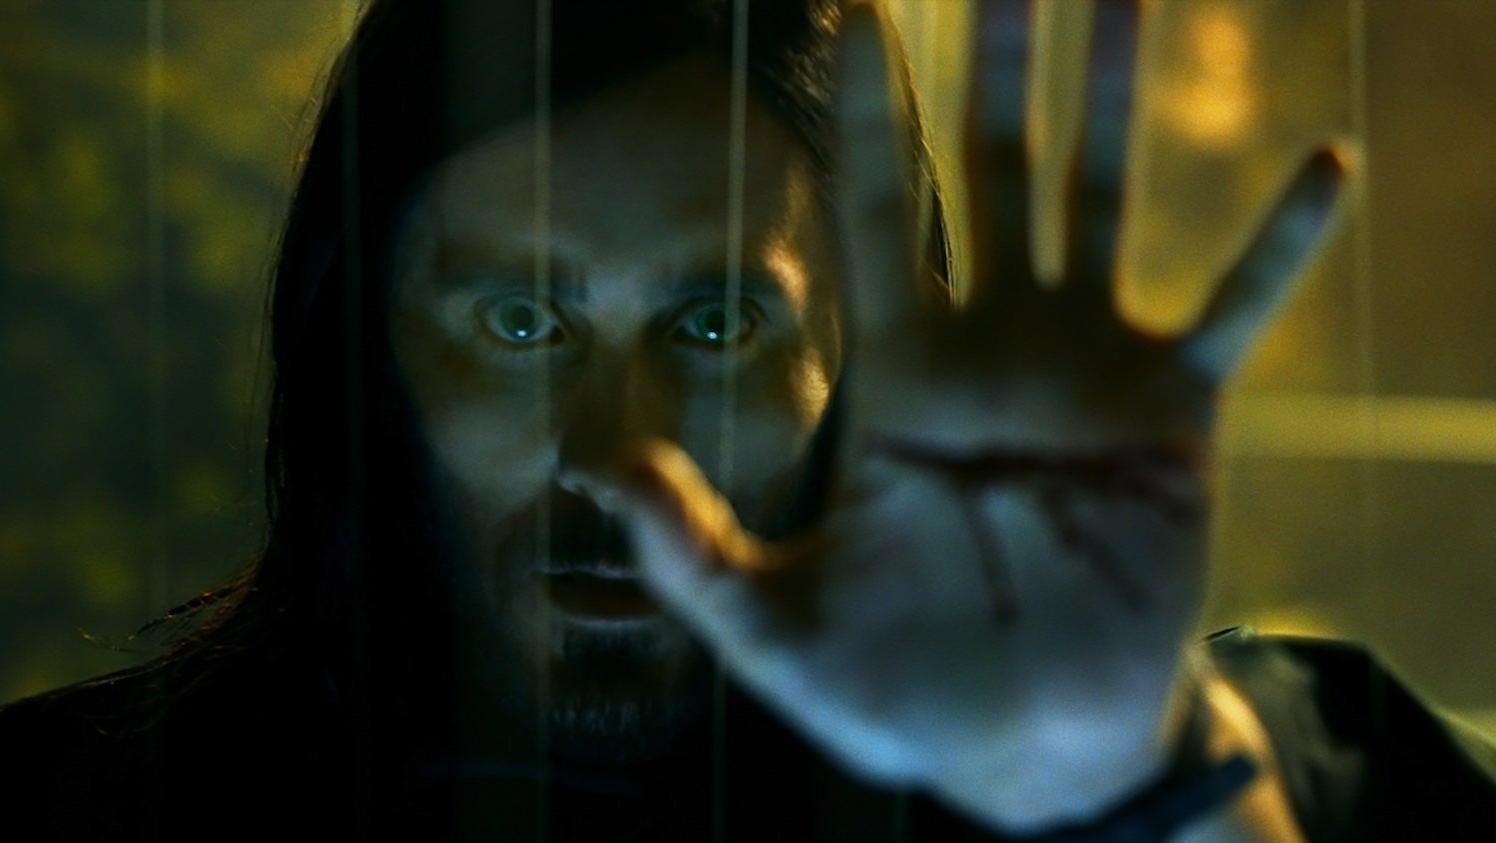 In Morbius, Jared Leto leads a coldblooded supervillain origin story